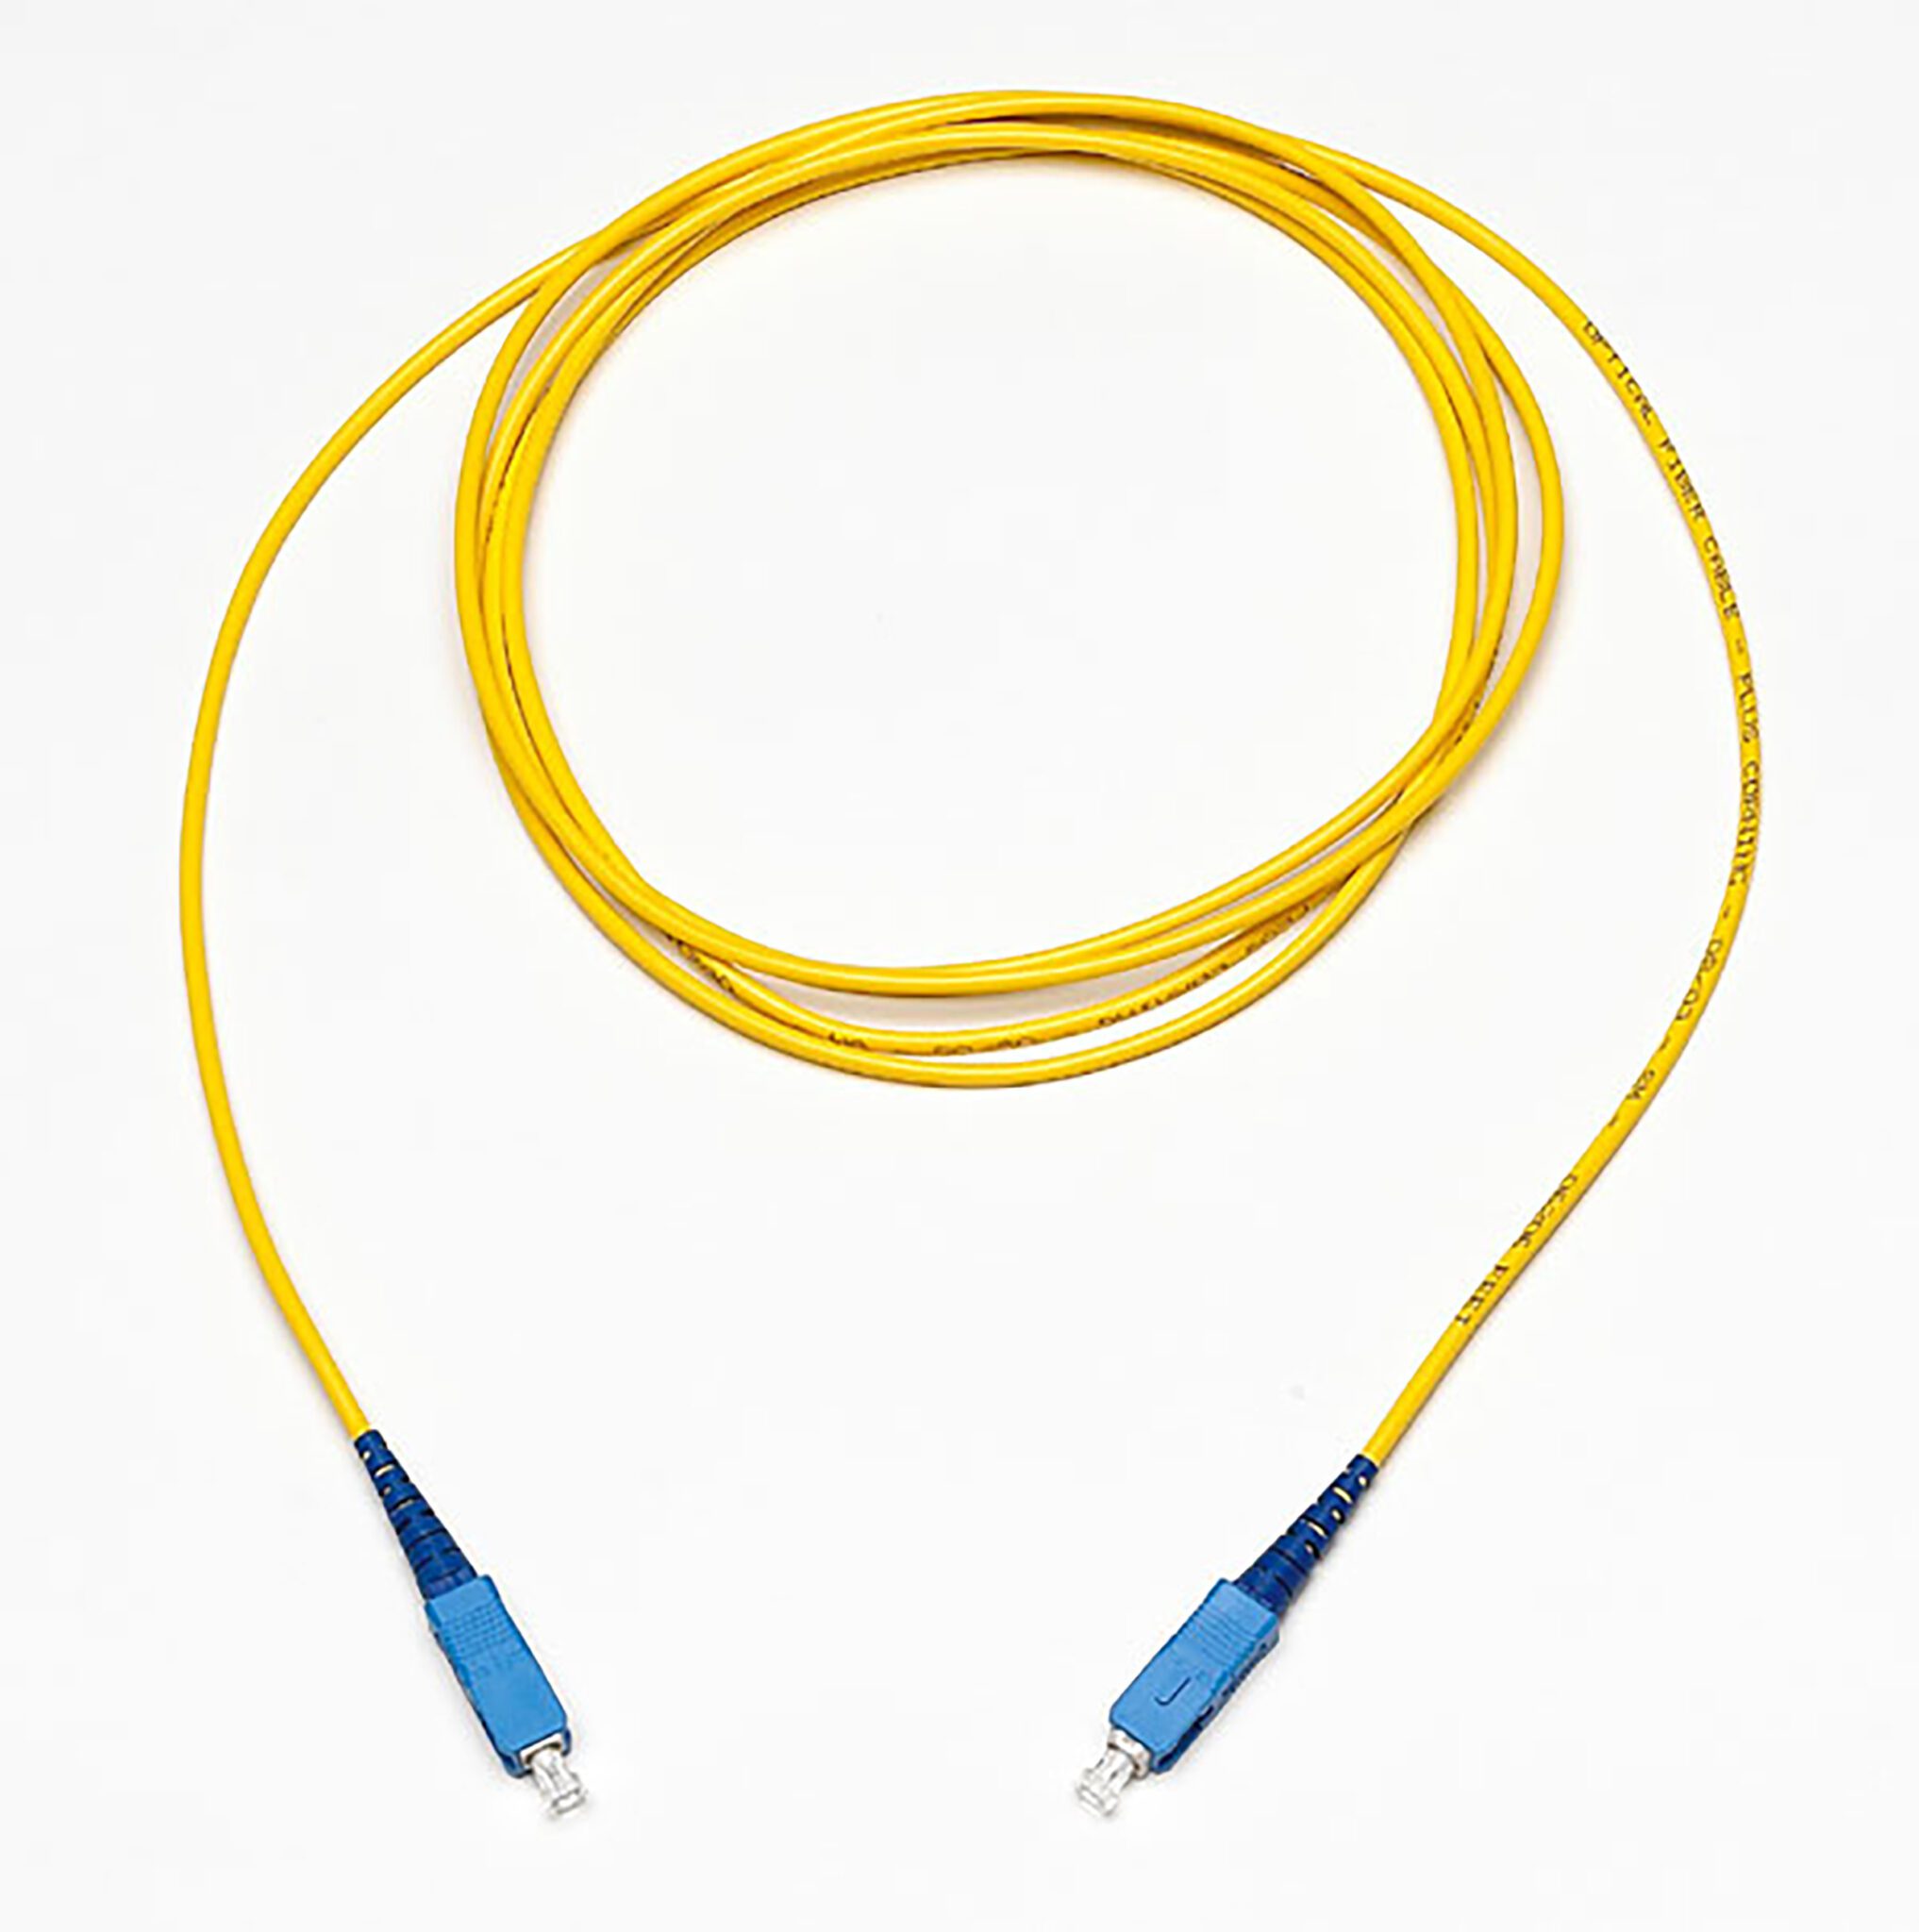 MPS-1000 Singlemode jumper cables from CDM Electronics